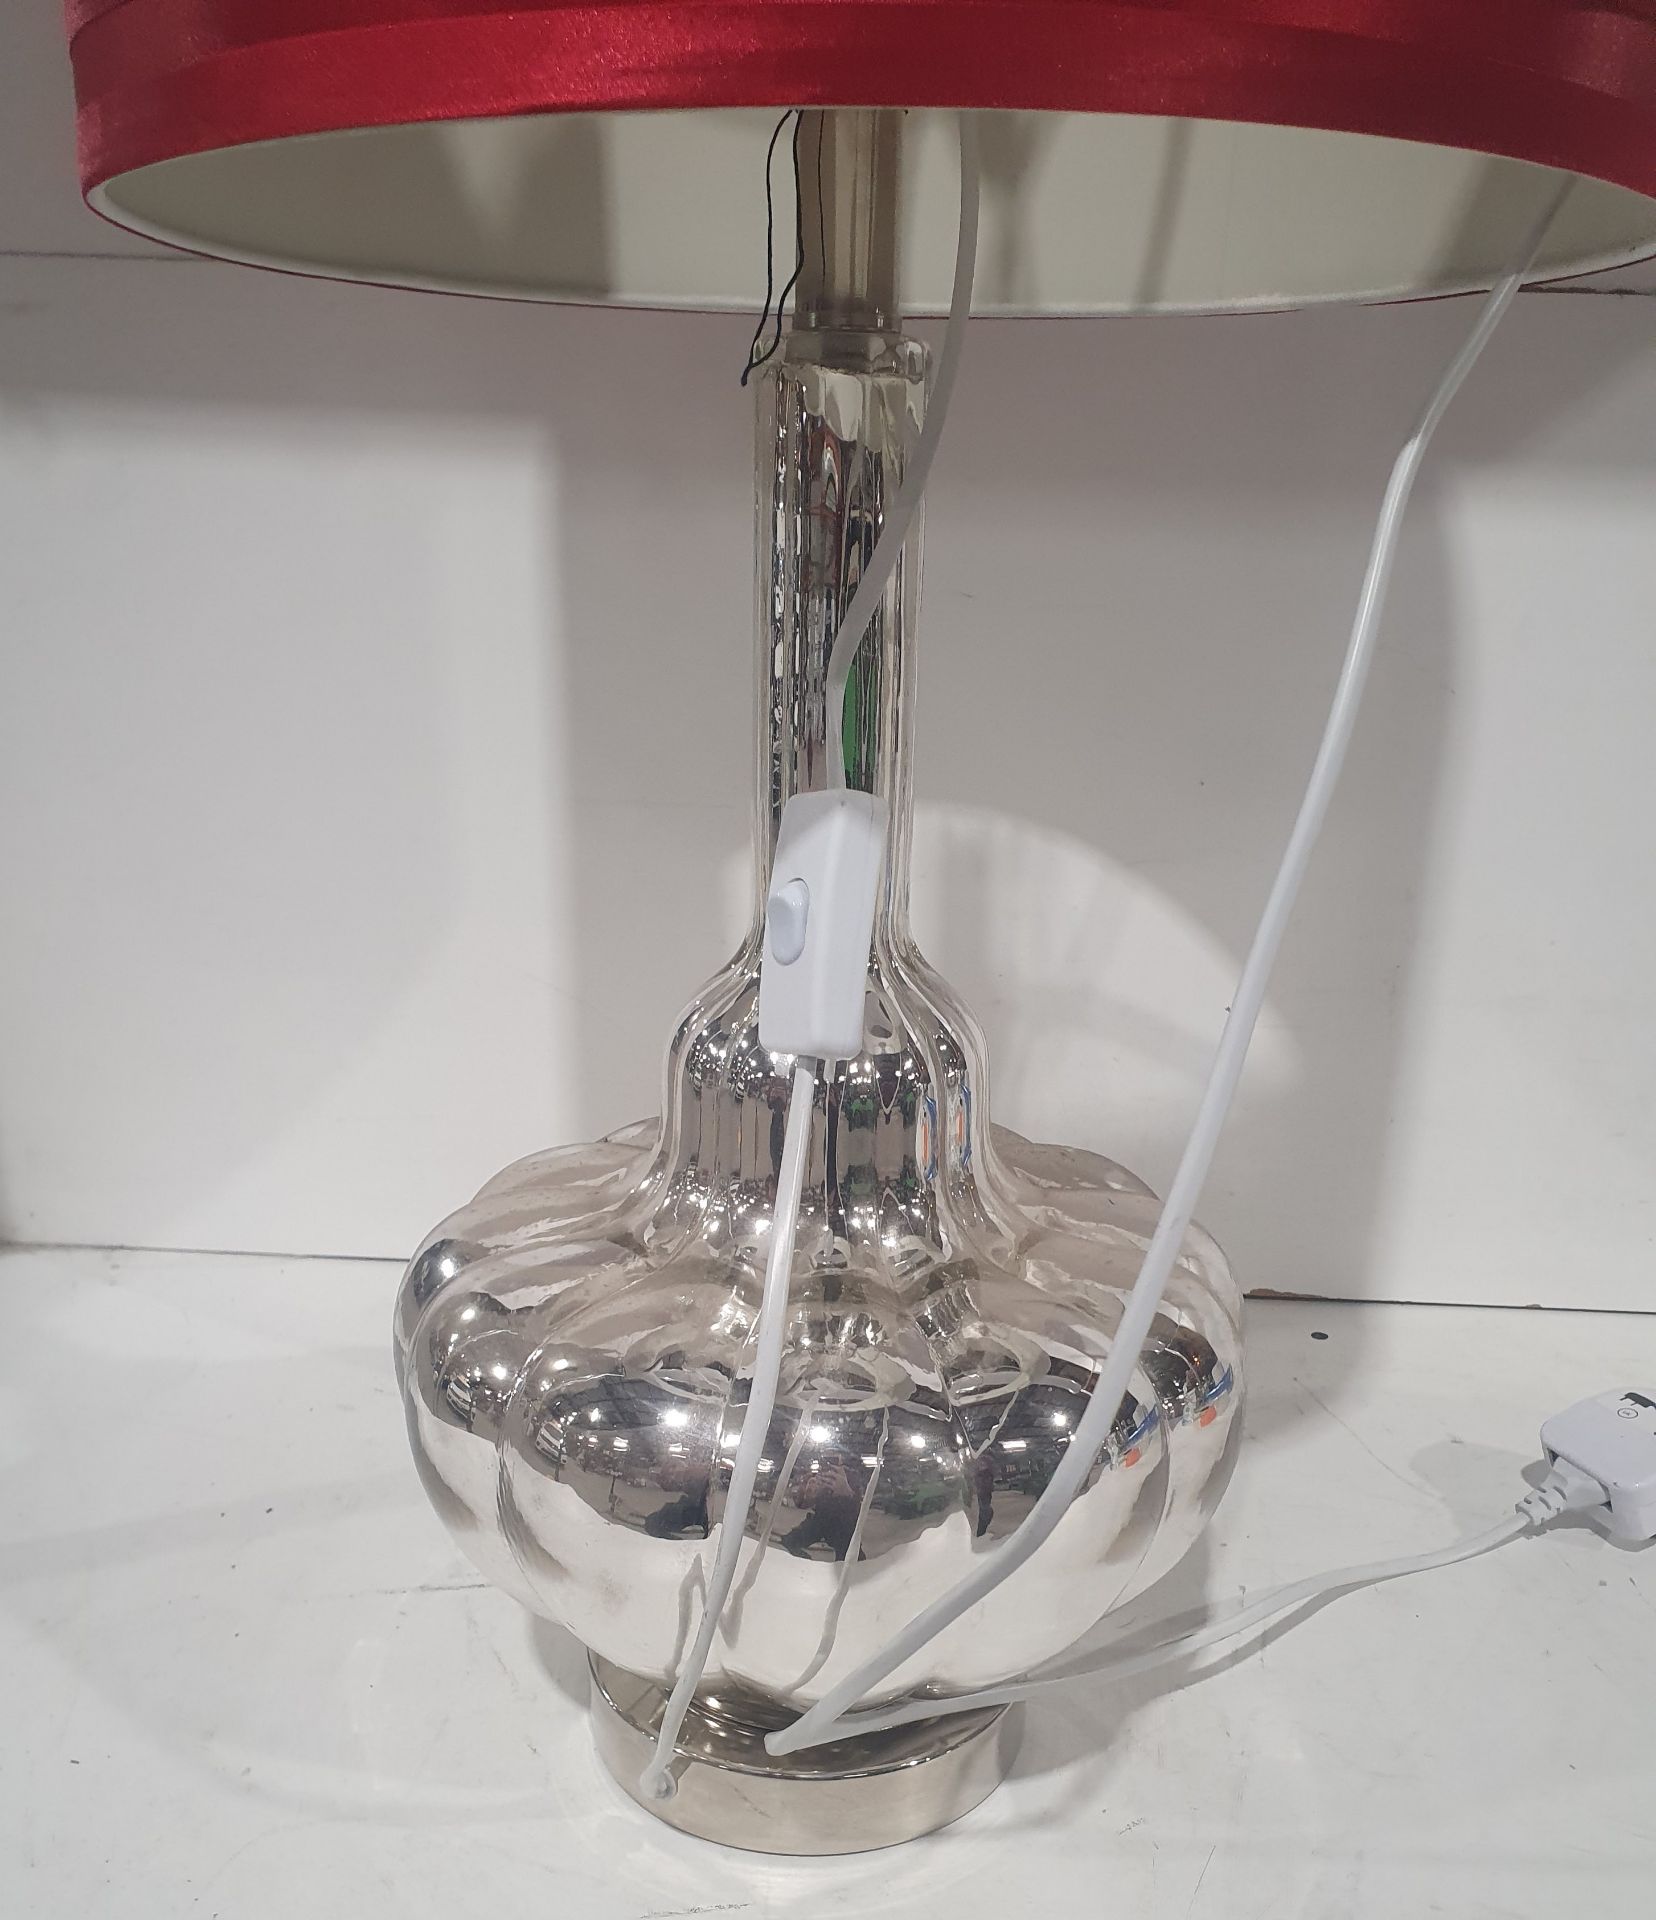 Silver Metal Lamp Base with Red Shade - Image 2 of 4